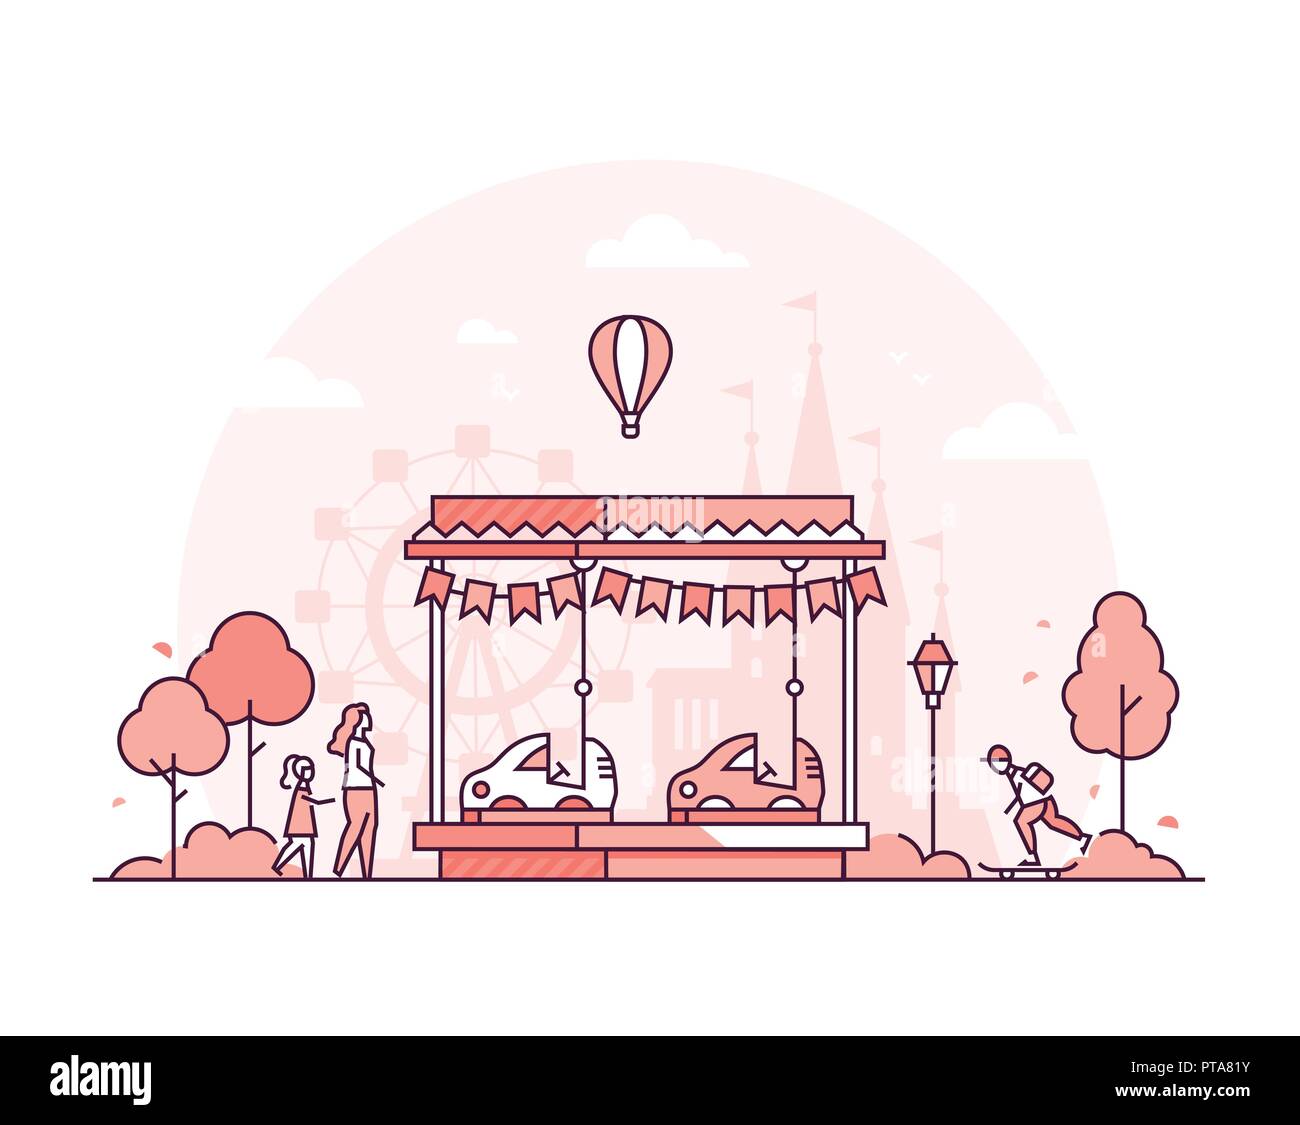 Carousel - thin line design style vector illustration on white background. High quality red colored composition with a carting for children, attractio Stock Vector